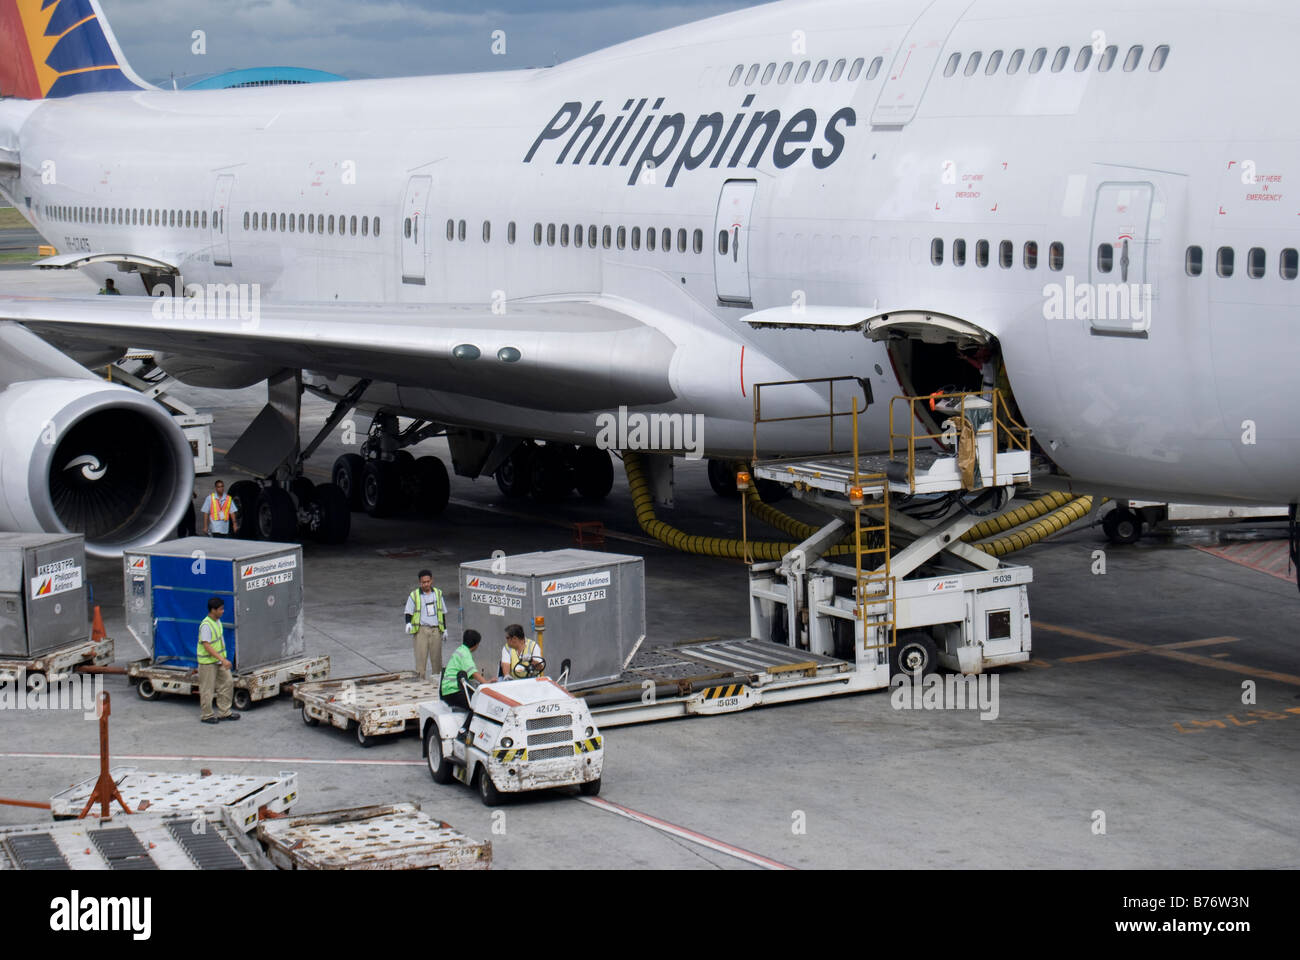 Philippine Airlines Boeing 747 being loaded with cargo containers, Manila International Airport, Manila, Philippines Stock Photo